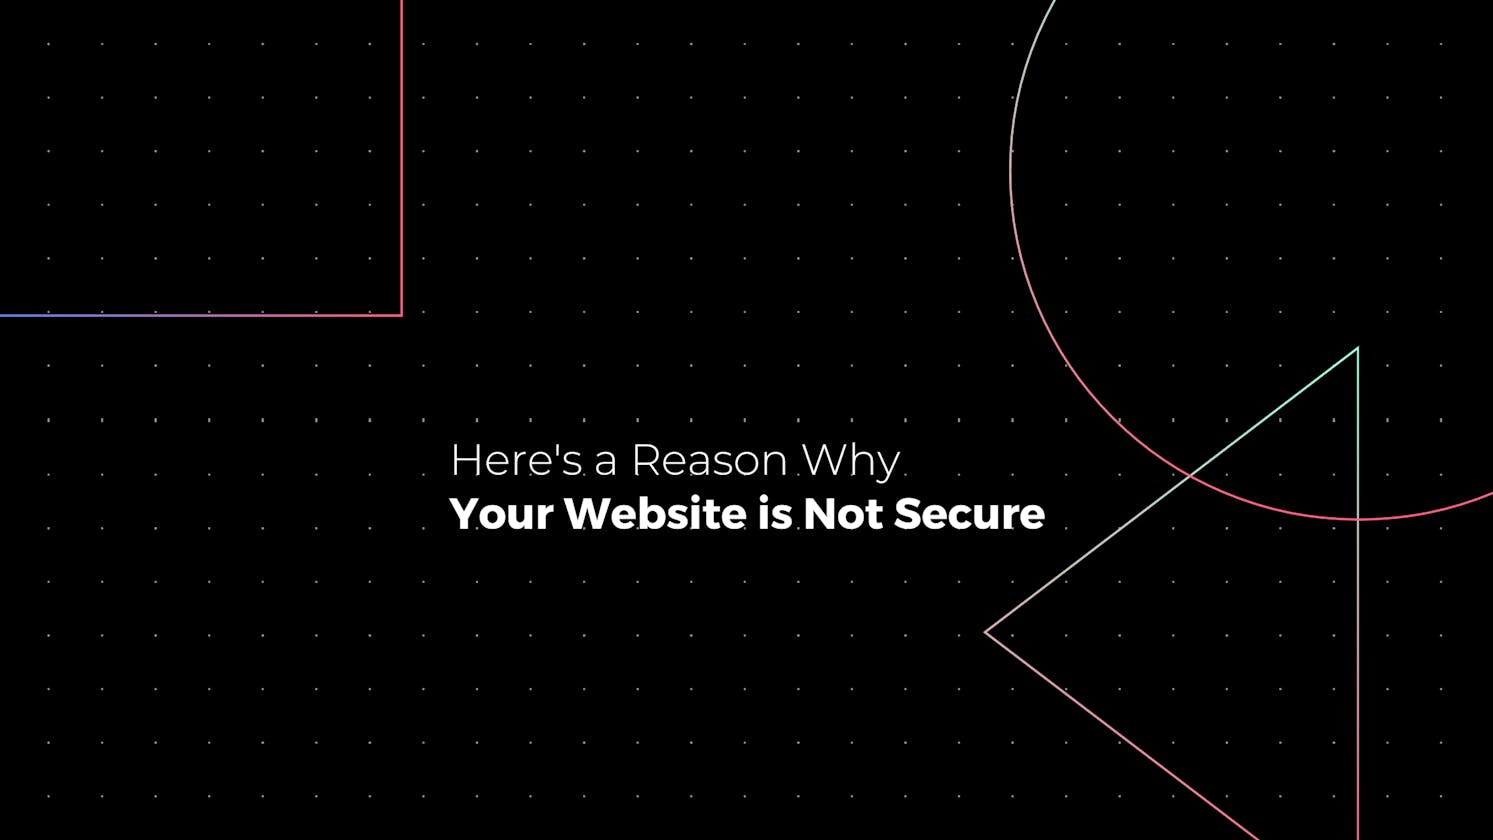 Here’s a reason why your website is not secure